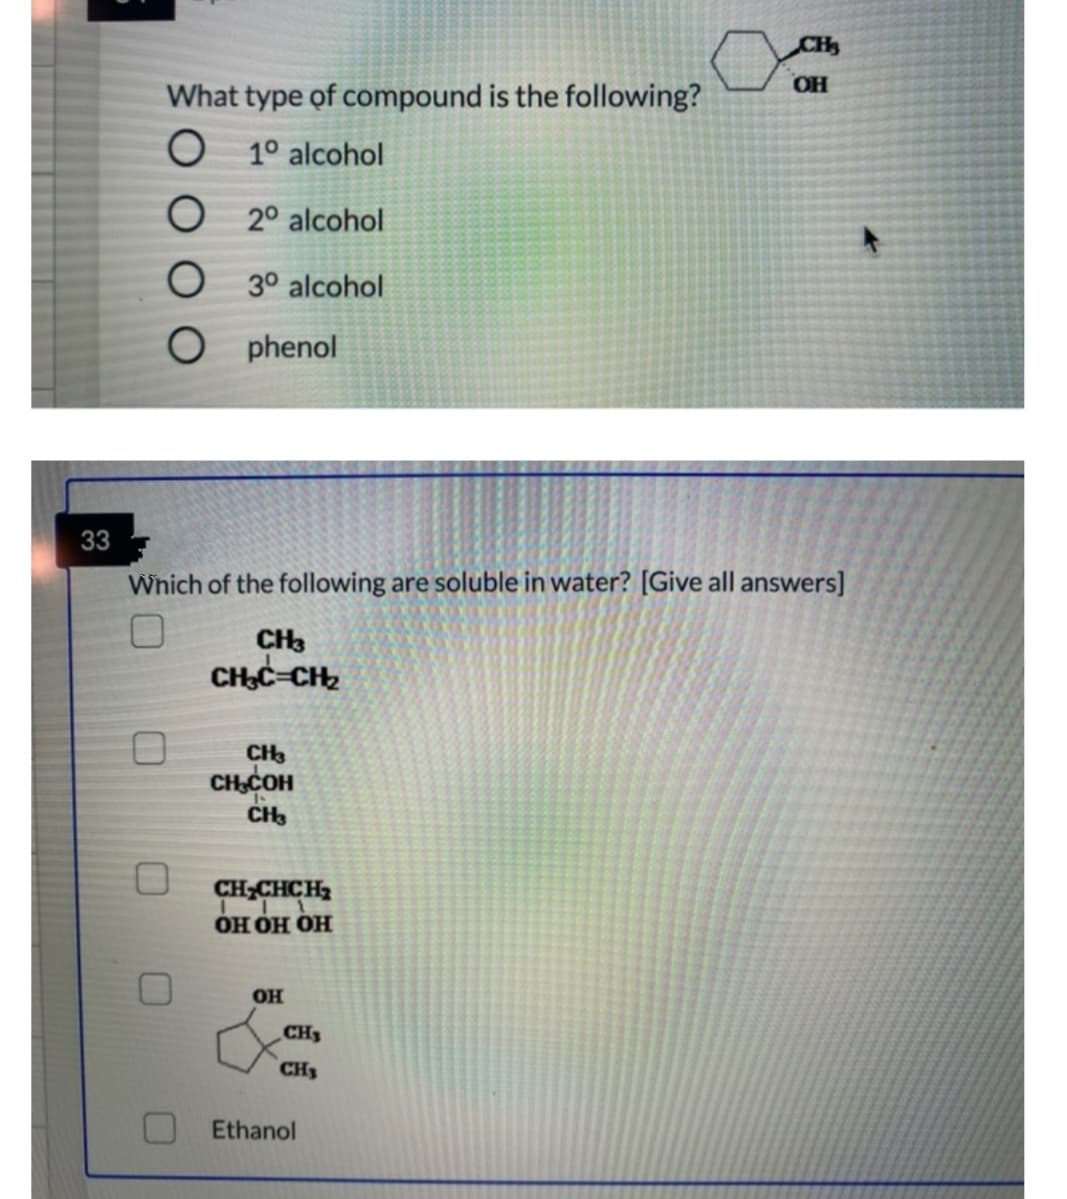 CH
OH
What type of compound is the following?
O 1º alcohol
O 2º alcohol
O 3º alcohol
O phenol
